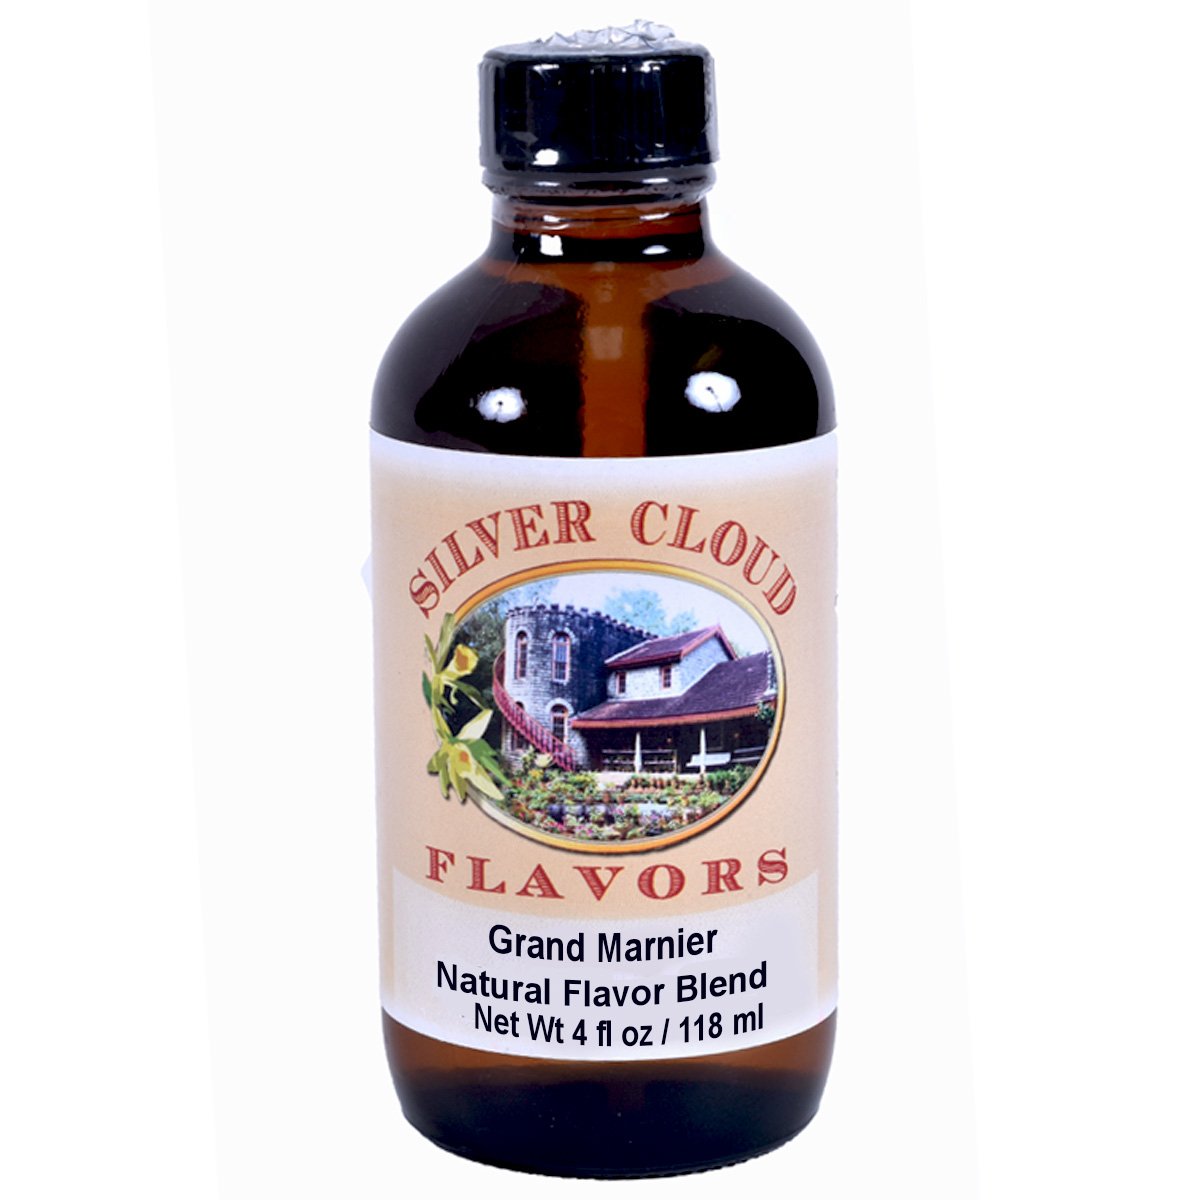 Grand Marnier, Natural Flavor Blend Silver Cloud Extract - Bake Supply Plus